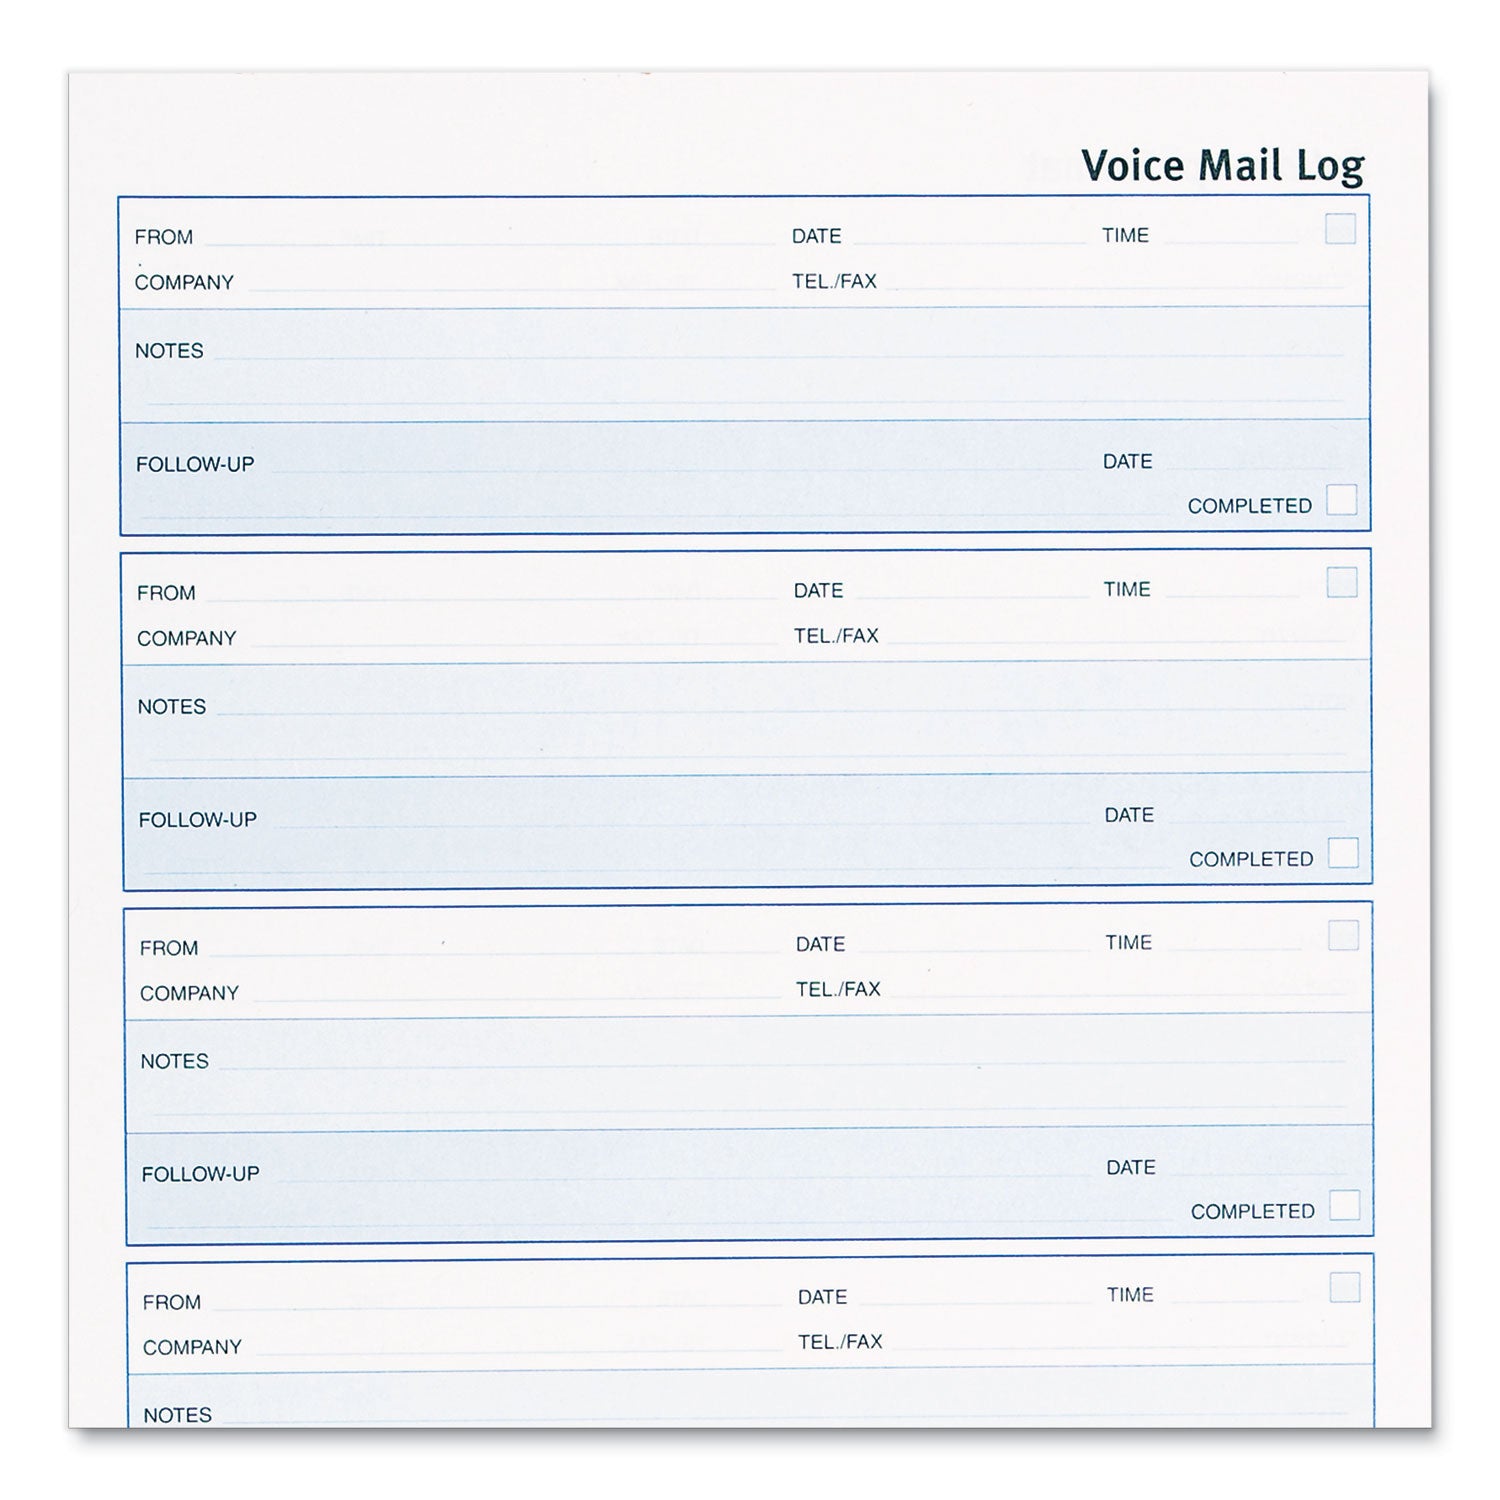 Follow-up Wirebound Voice Mail Log Book, One-Part (No Copies), 7.5 x 2, 5 Forms/Sheet, 500 Forms Total - 